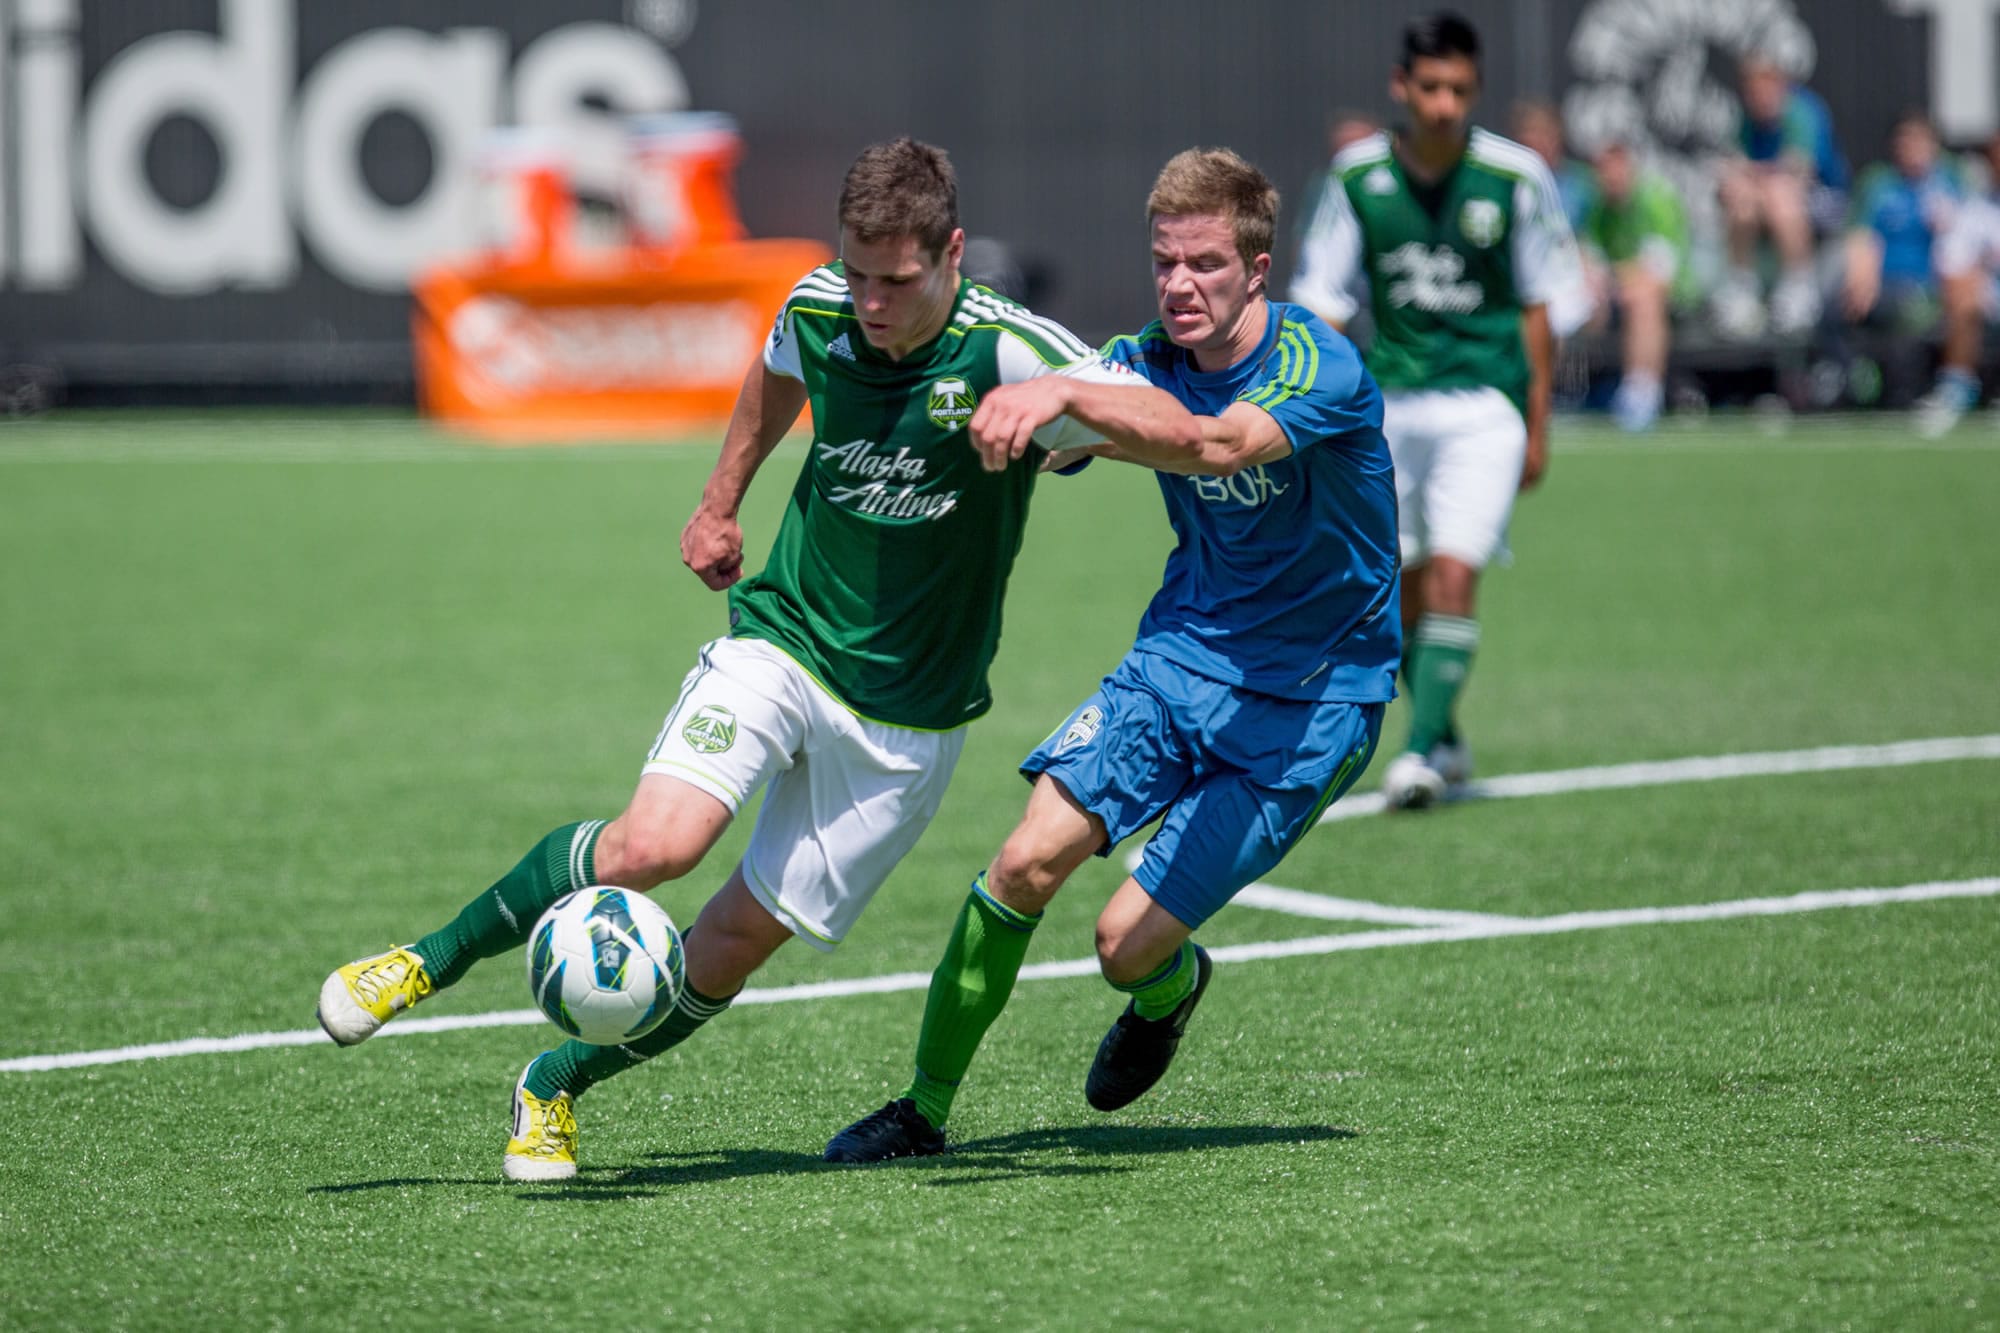 Mountain View High School senior Foster Langsdorf said playing for the Timbers Academy helped him get the chance to play college soccer for Stanford.